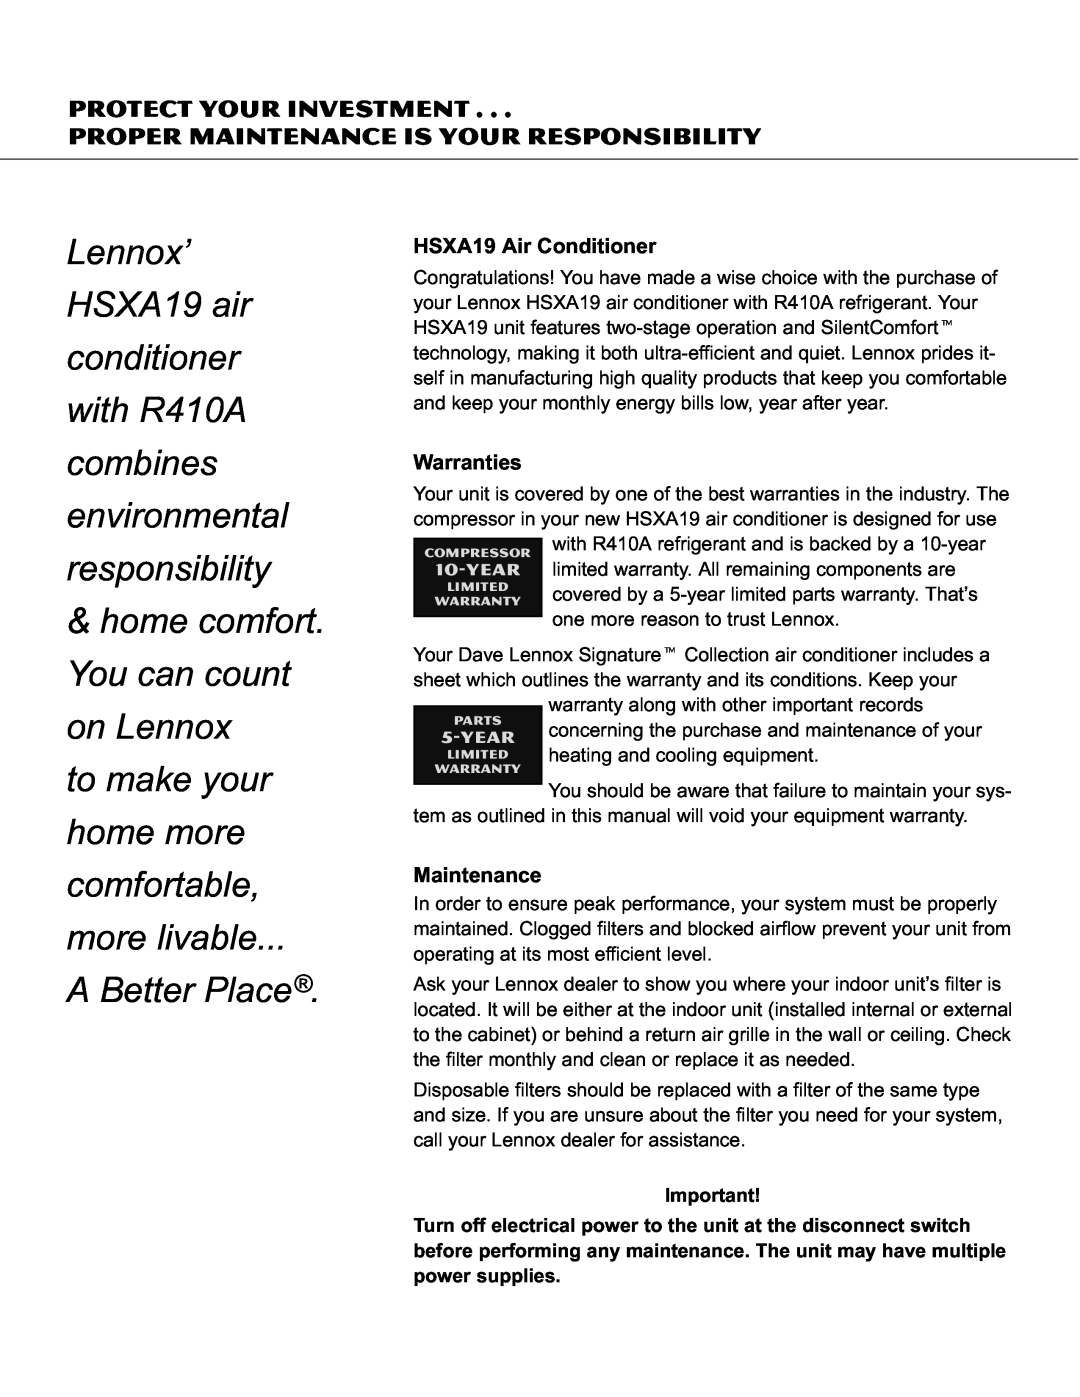 Lenoxx Electronics owner manual HSXA19 Air Conditioner, Warranties, Maintenance, home comfort. You can count on Lennox 